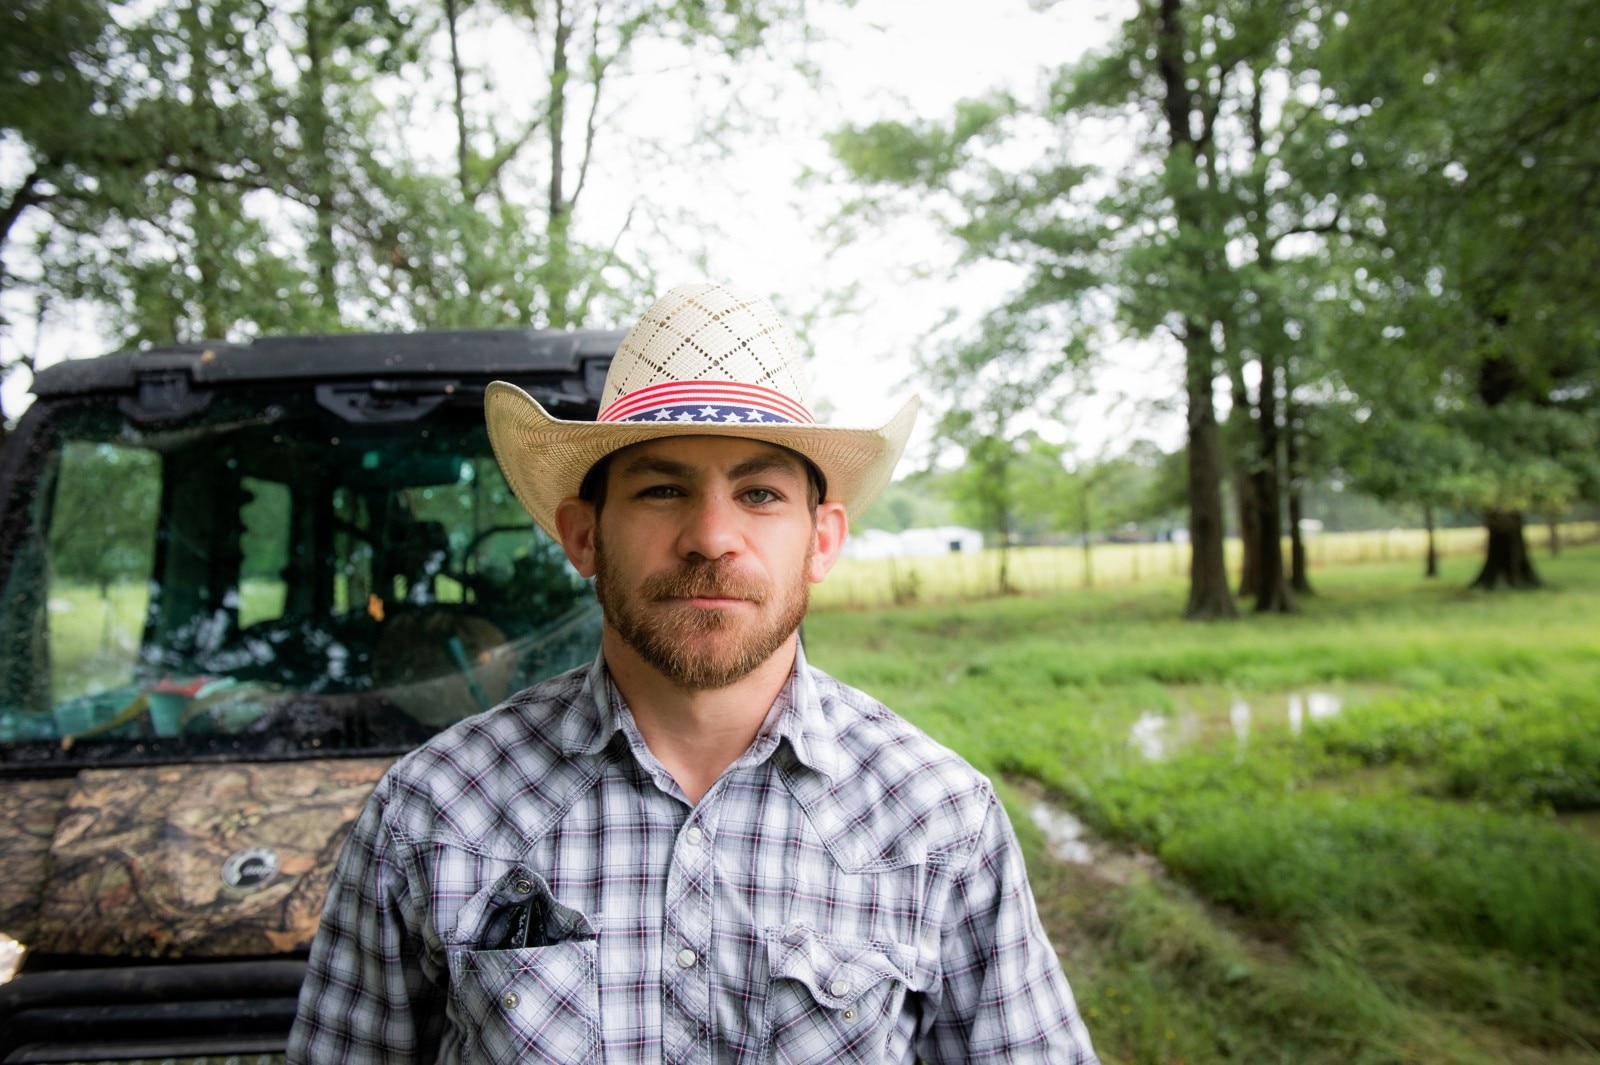 Champion Bull Rider Chase Outlaw standing in front of his SxS Defender from Can-Am